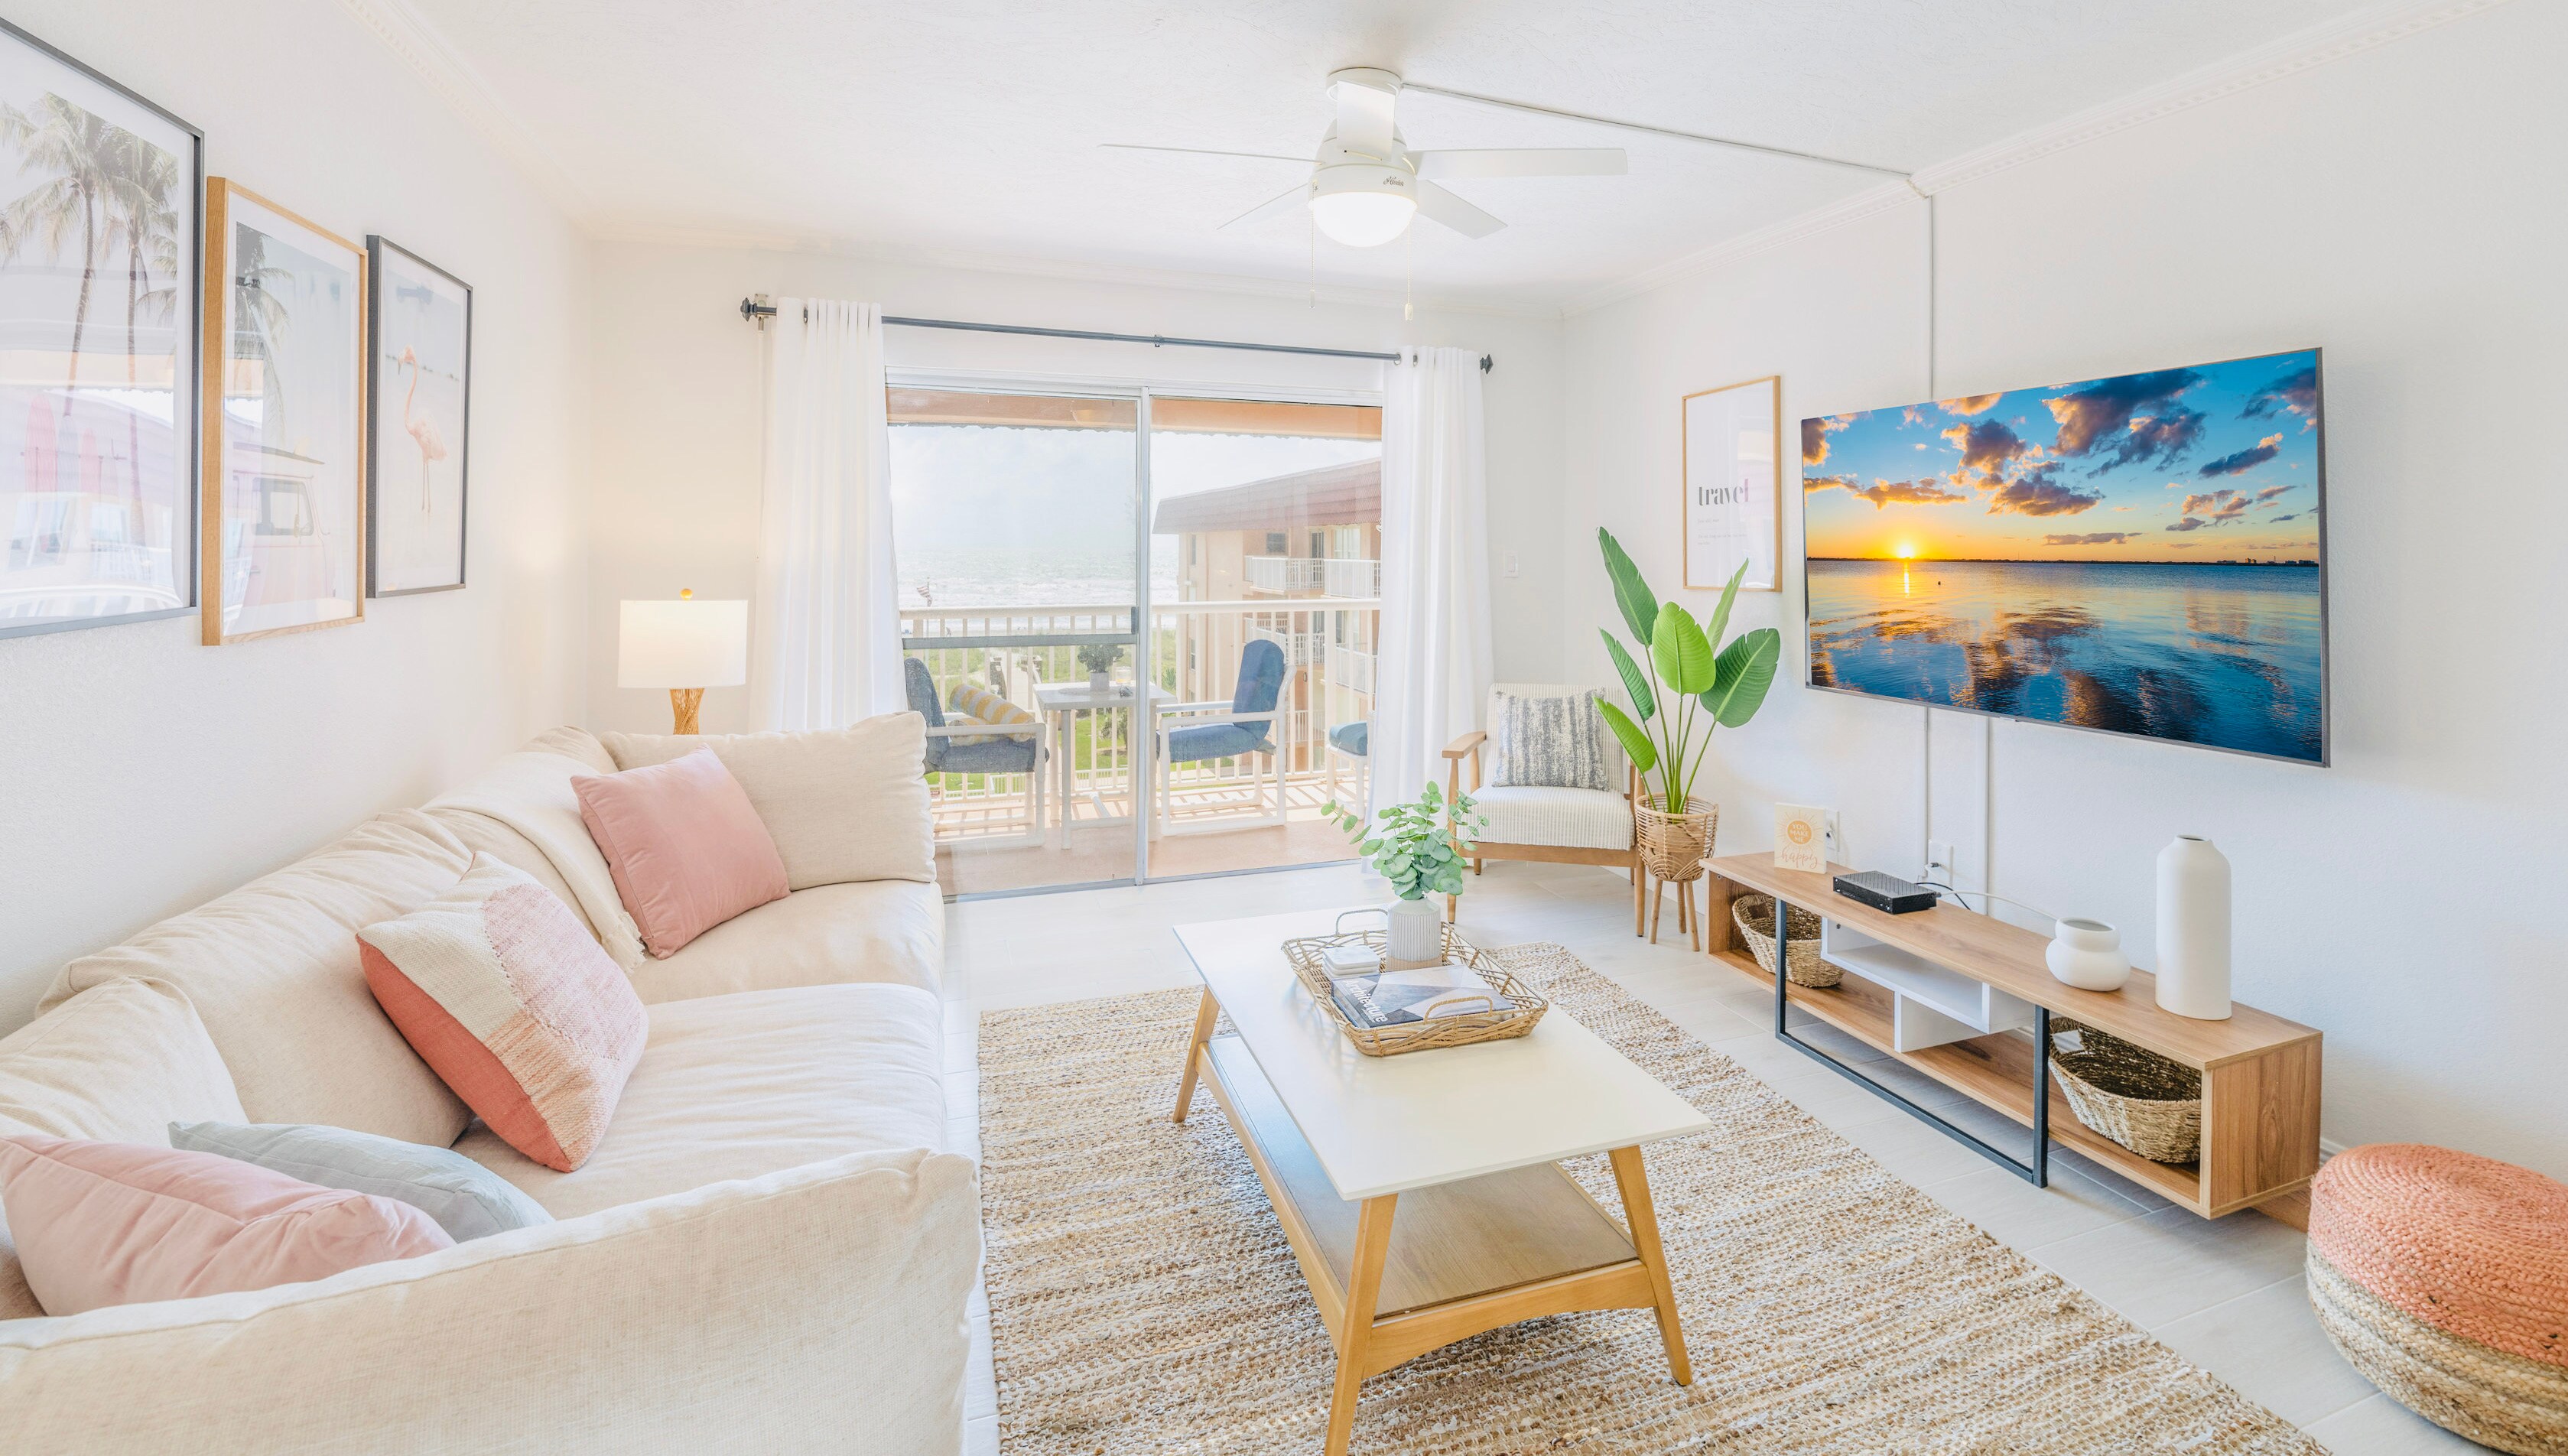 Picture yourself here! Stare directly to the ocean from your beautiful updated living room. When you aren't enjoying the view or beach, you can enjoy watching your favourite shows on the massive smart TV.